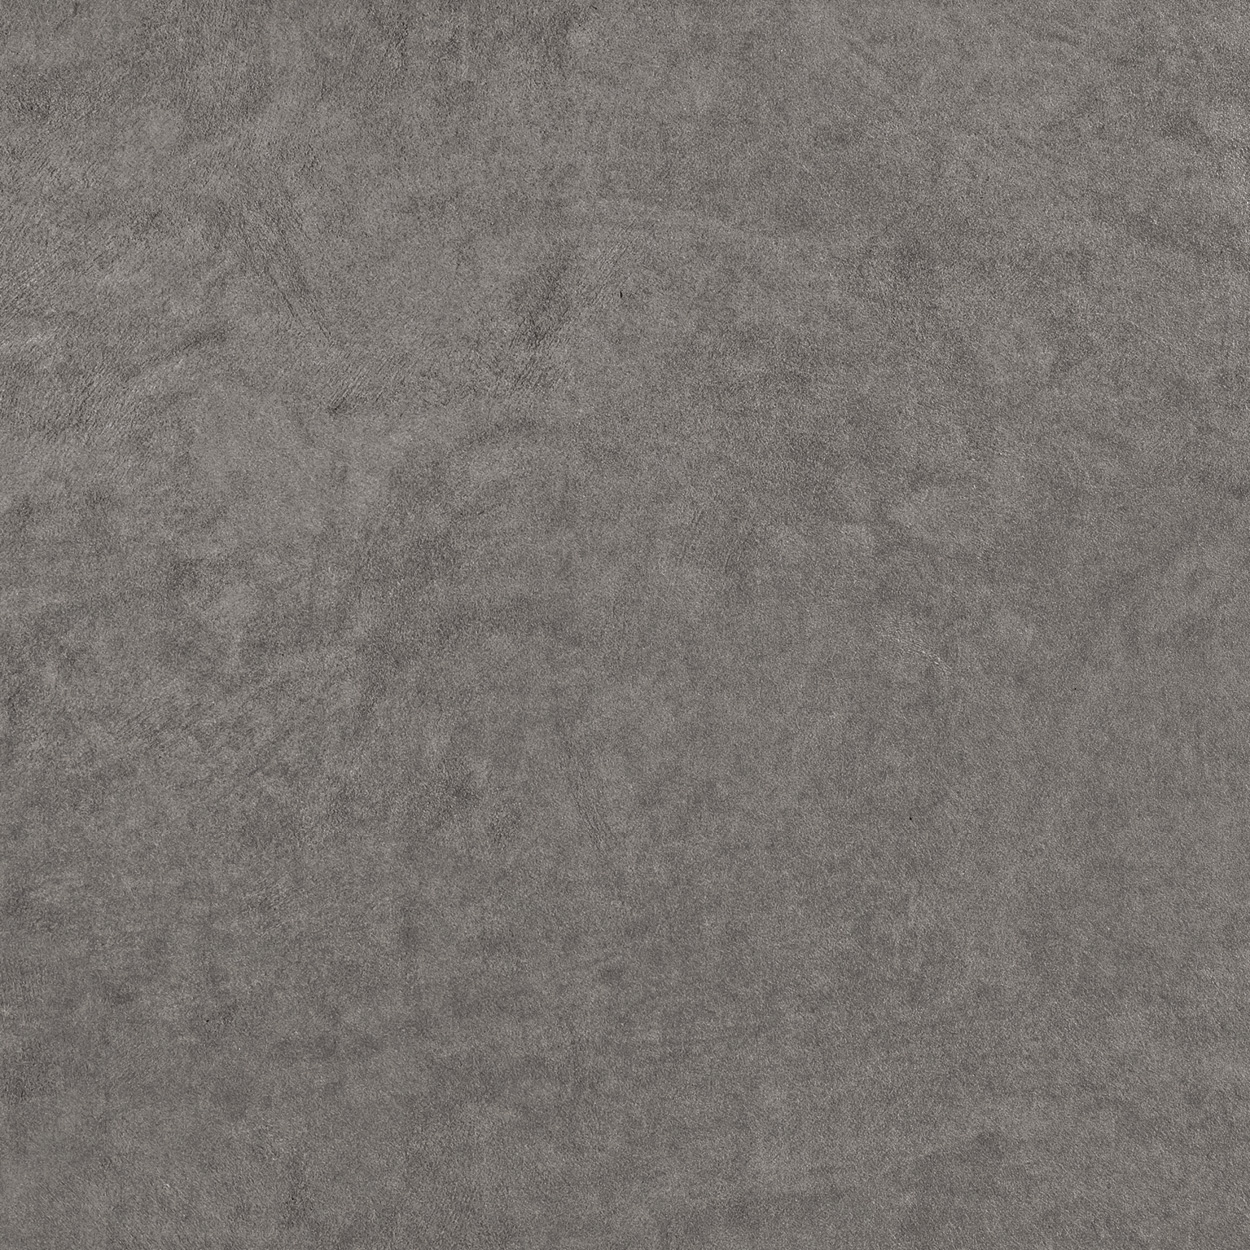 24 x 24 Seamless CL_02 Porcelain tile (SPECIAL ORDER ONLY)